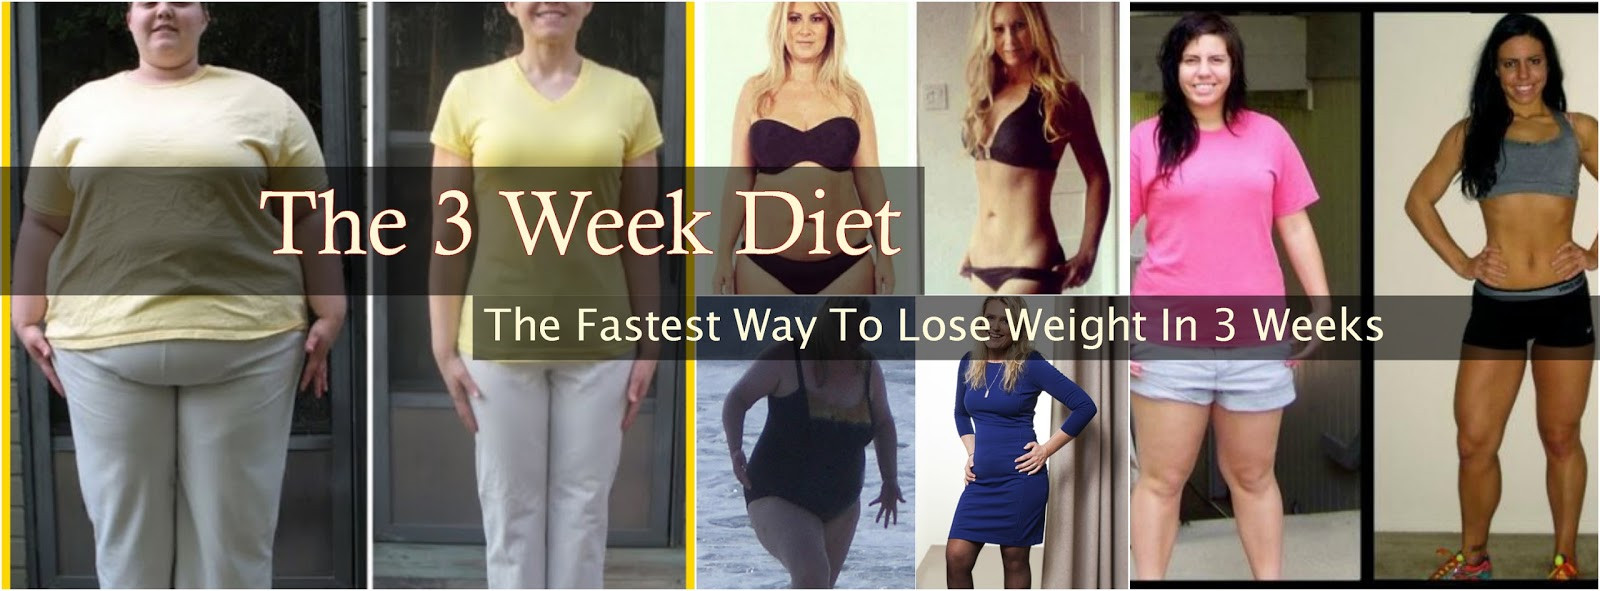 How To Lose Weight In 3 Weeks
 The 3 Weeks Diet The Fastest Way To Lose Weight In 3 Weeks